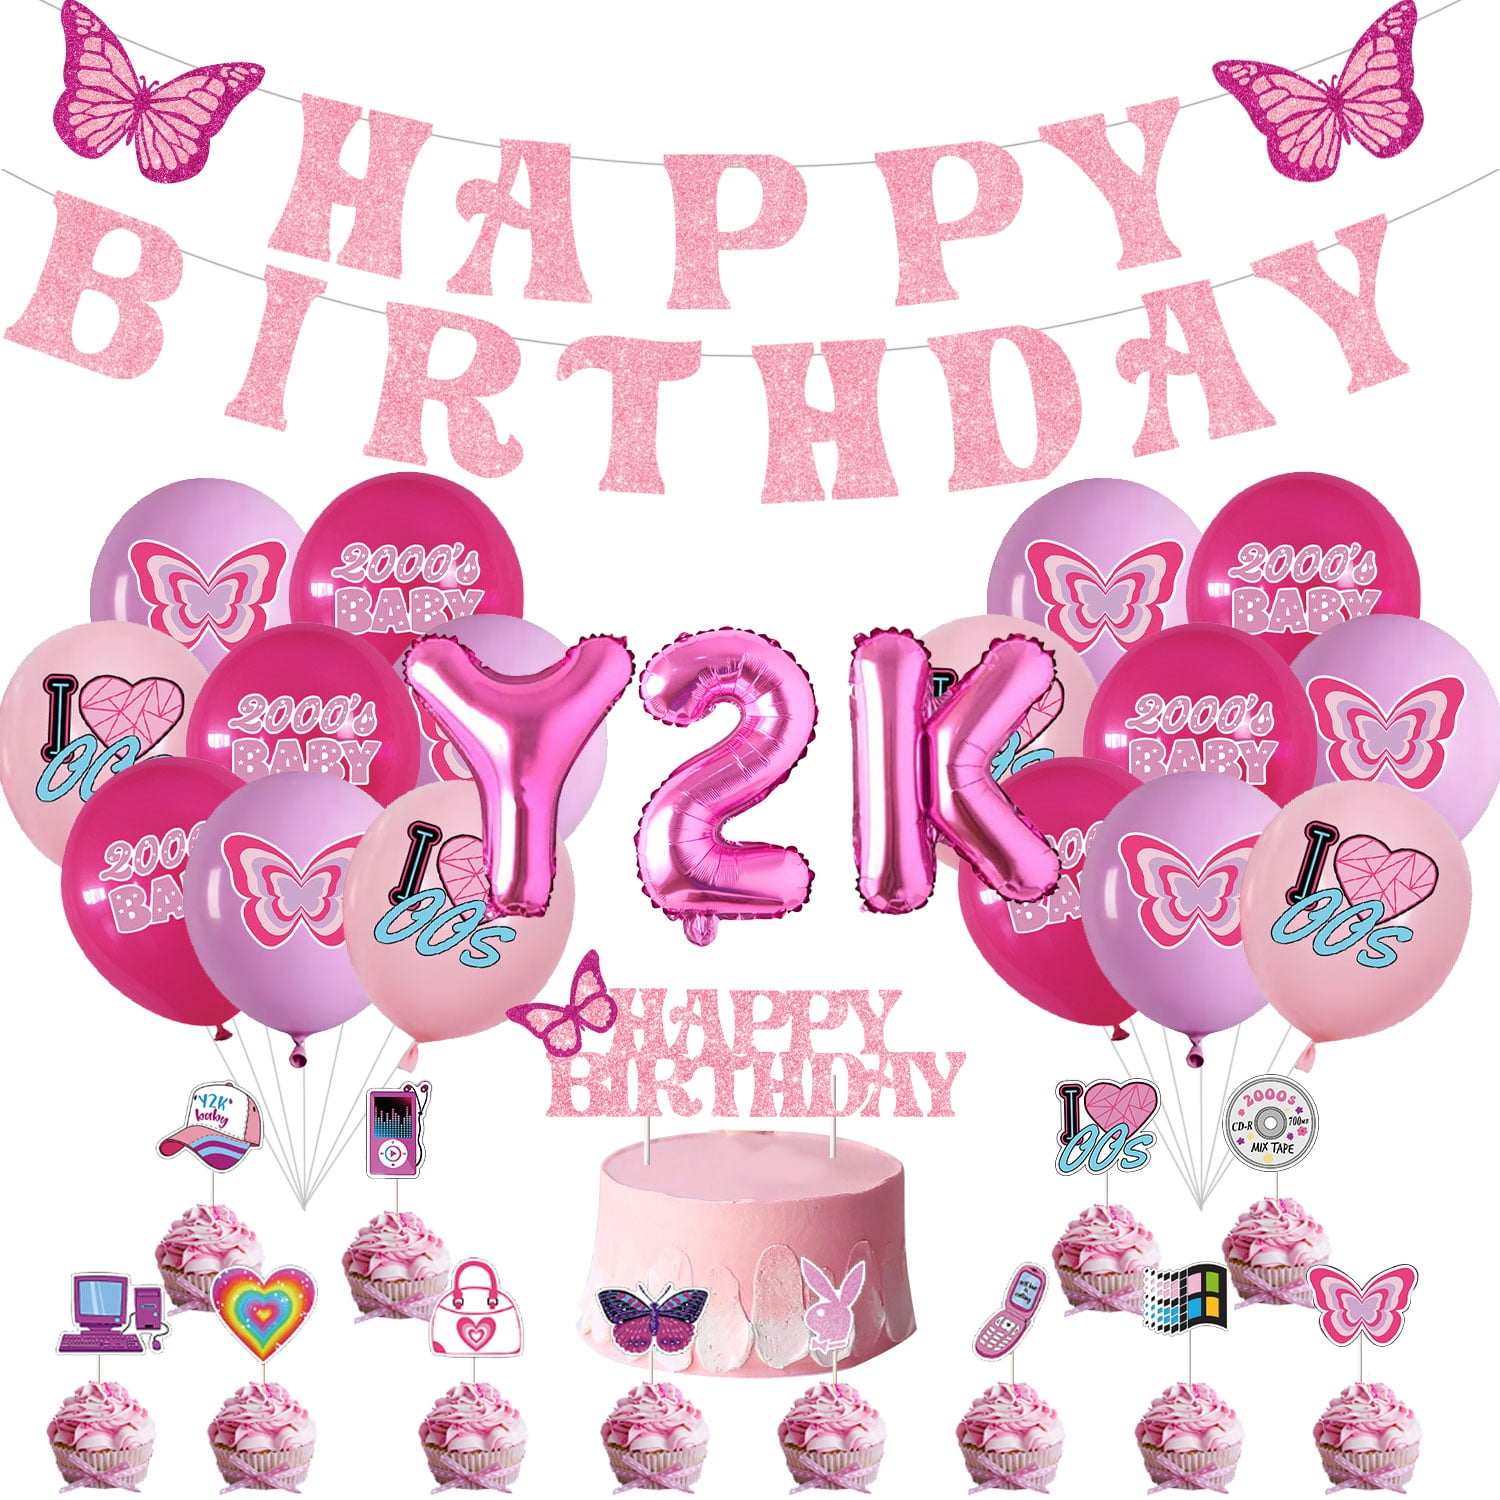 Y2k Party Decorations for Girls, Y2k Birthday Party Decorations, Pink Heart  Backdrop, Hanging Swirls, Cupcake Toppers, Y2k Foil Balloon Kit 00s Party